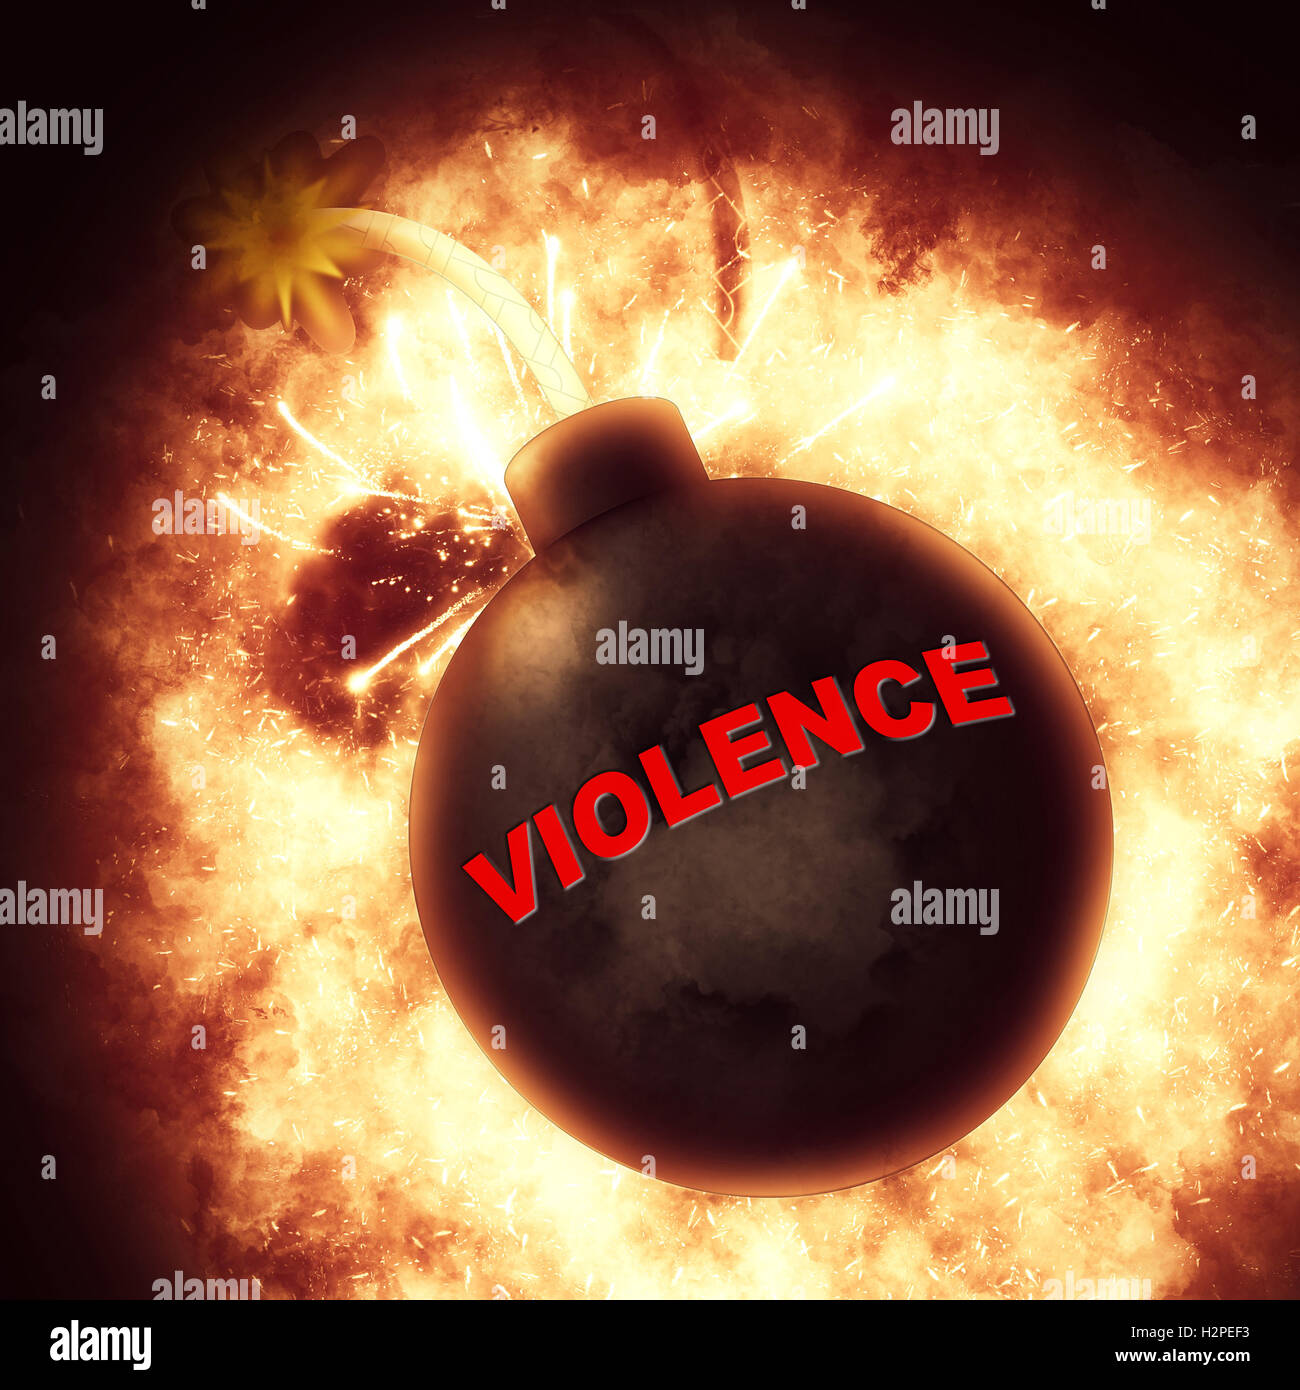 Violence Bomb Indicating Brute Force And Savagery Stock Photo